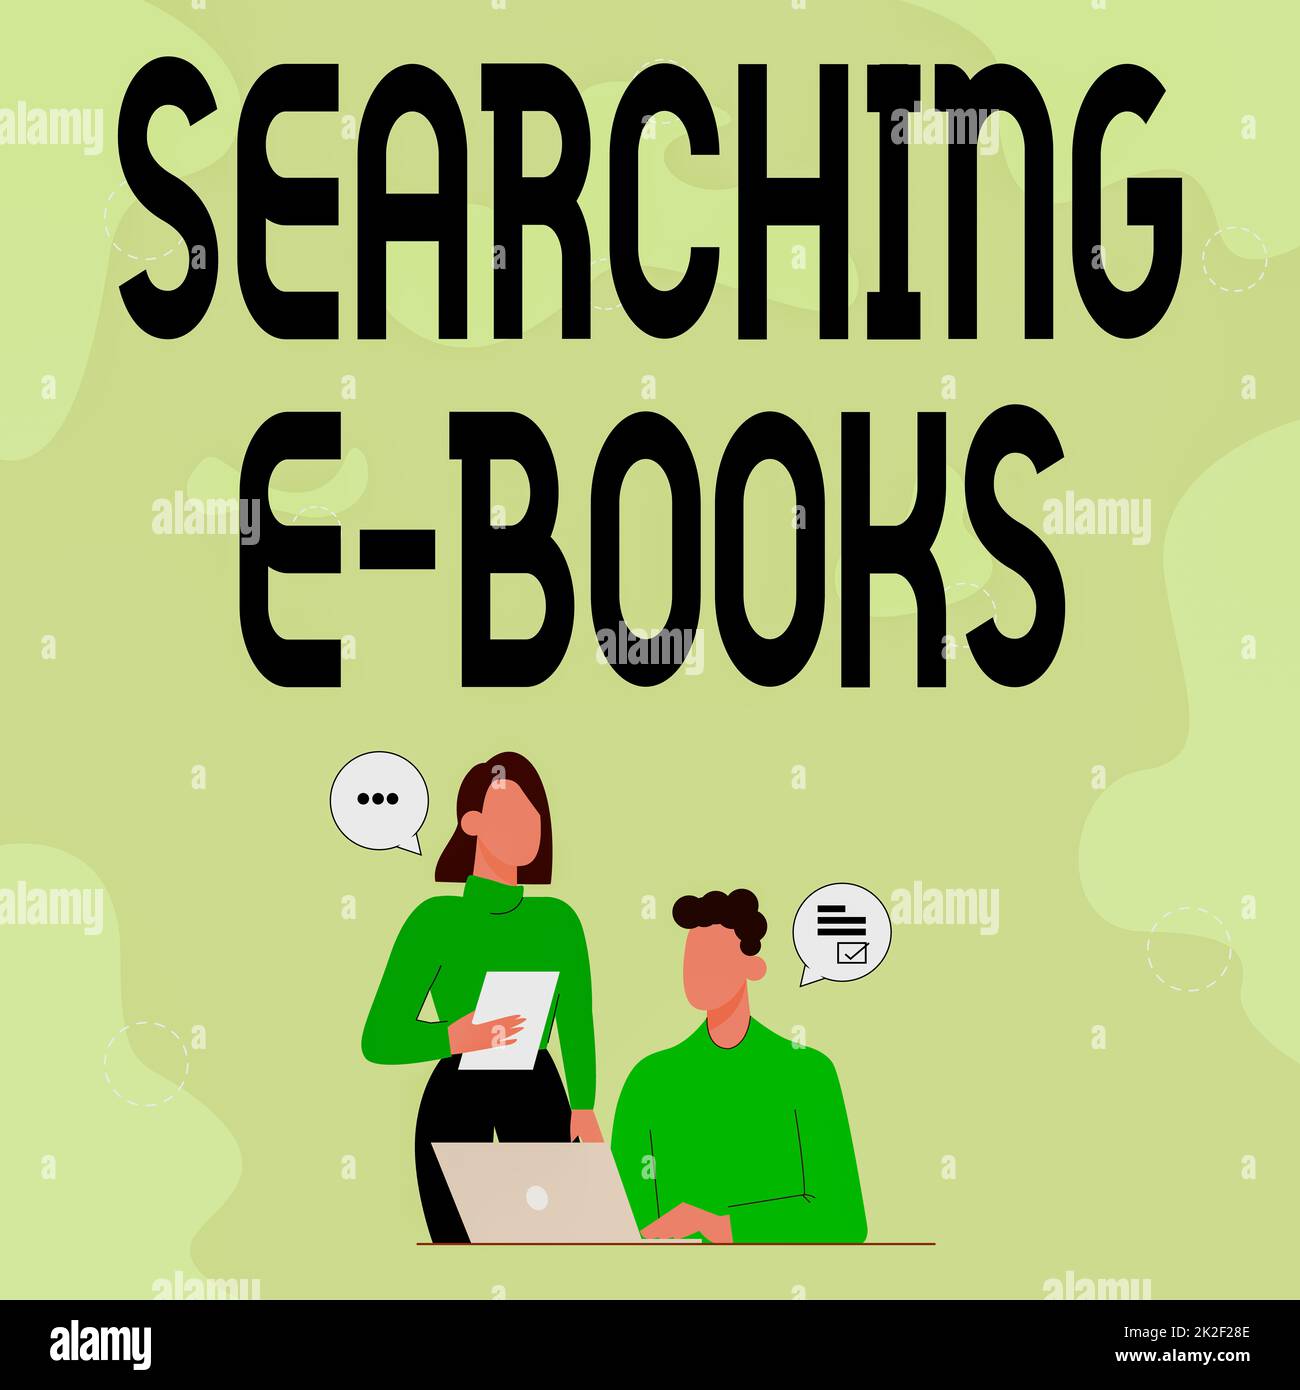 Sign displaying Searching E Books. Business approach looking for an electronic form of educational material Partners Sharing New Ideas For Skill Improvement Work Strategies. Stock Photo